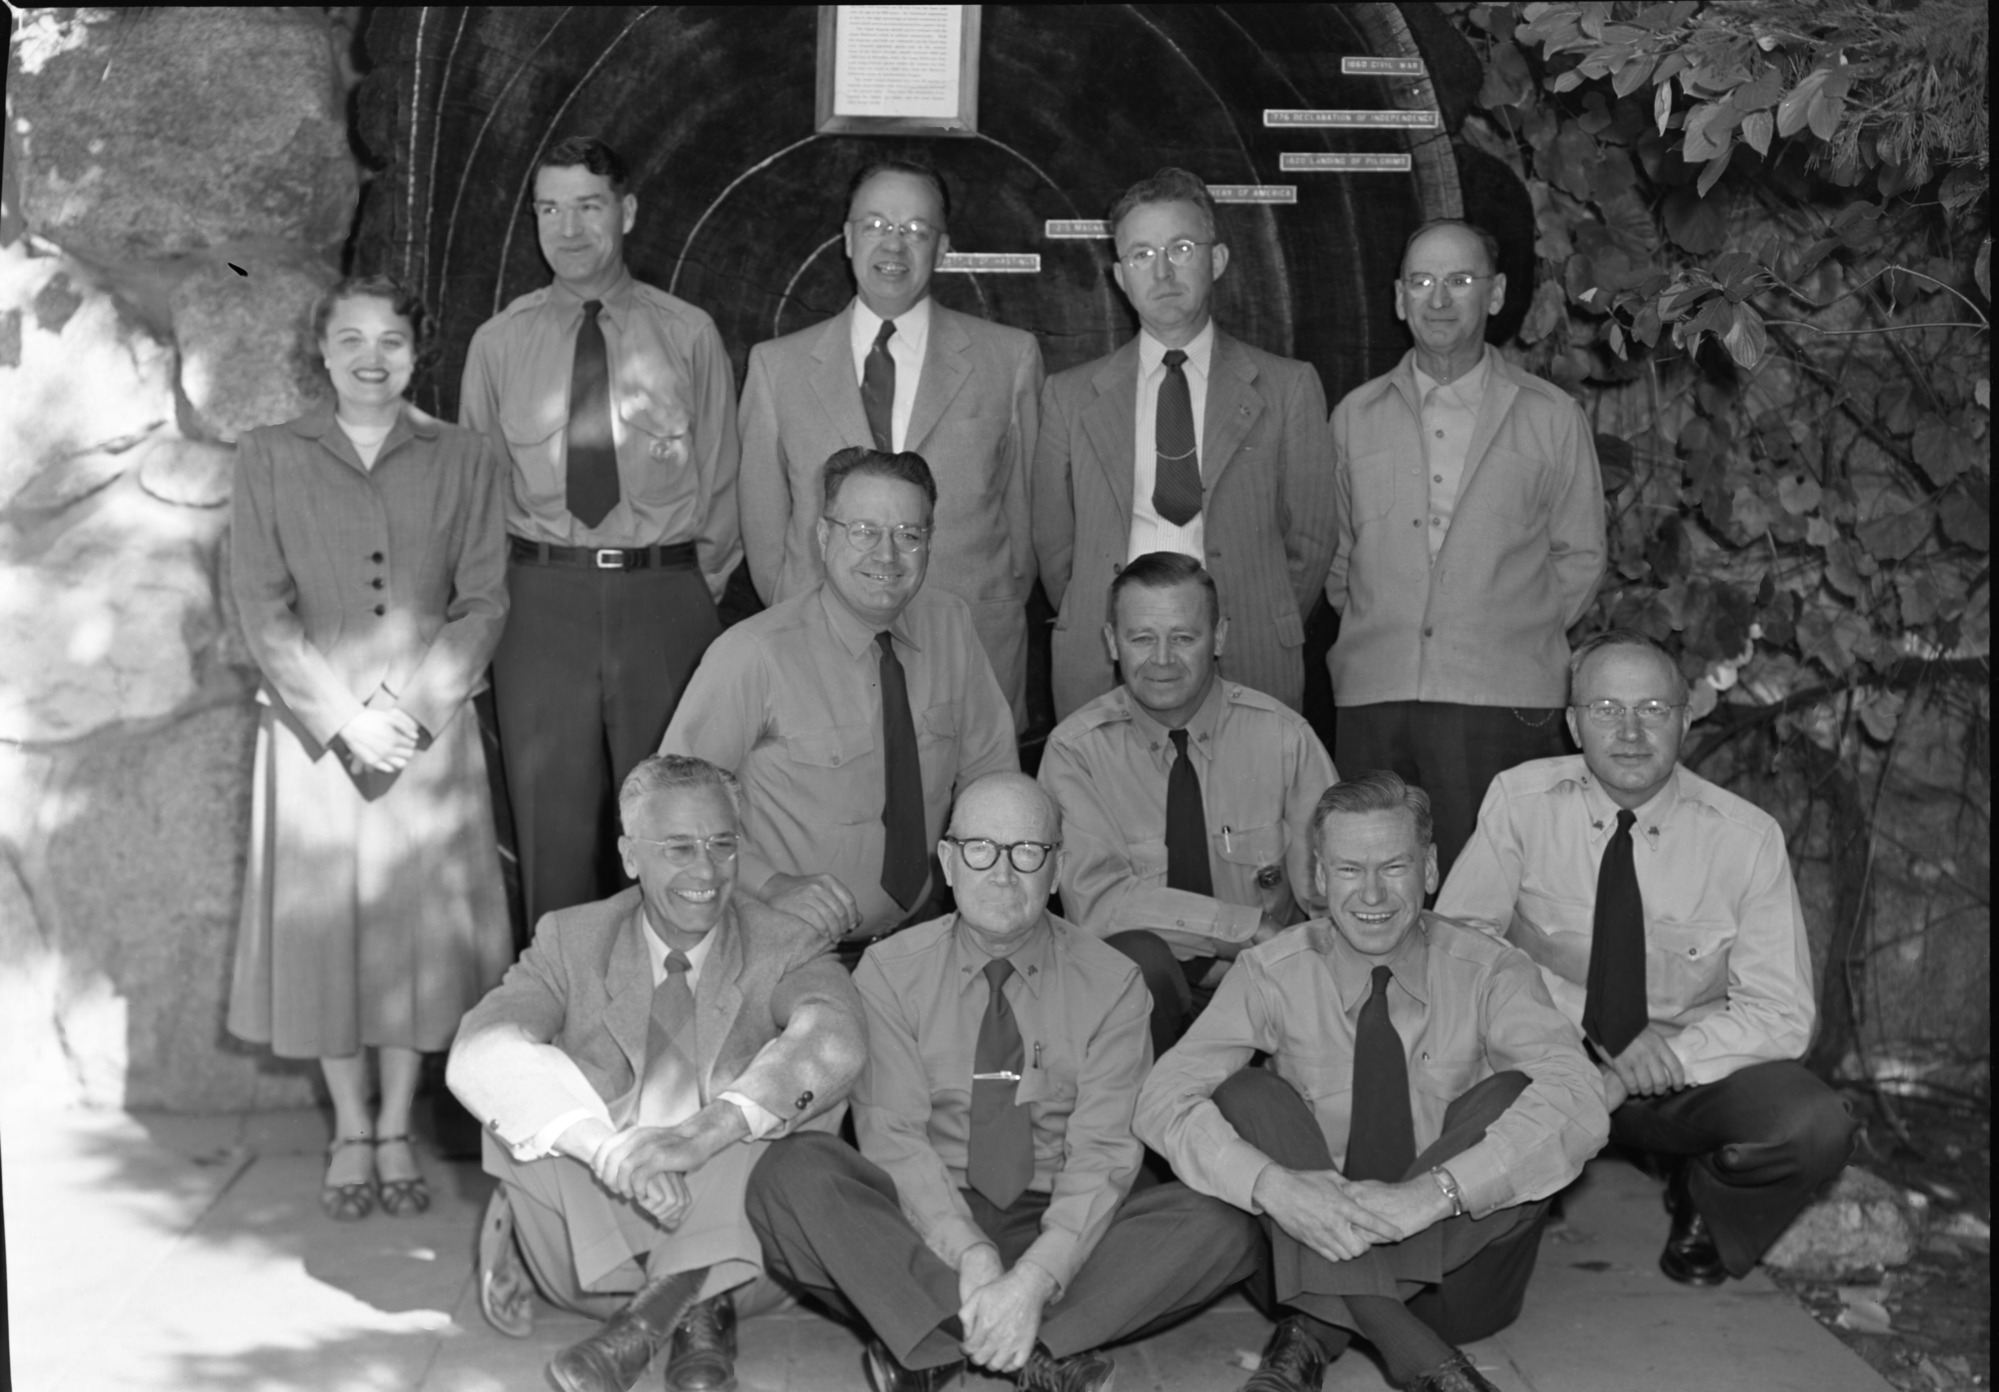 Supt. Russell and staff in front of Yosemite Museum after last staff meeting. LEFT TO RIGHT: Standing: Betty Koubelle, Homer Robinson, Carl Russell, E.C. Smith, Will Ellis. Kneeling: Emil Ernst, Duane Jacobs. Seated: Chas. F. Hill, Donald E. McHenry, Harthon L. Bill and Ralph H. Anderson.